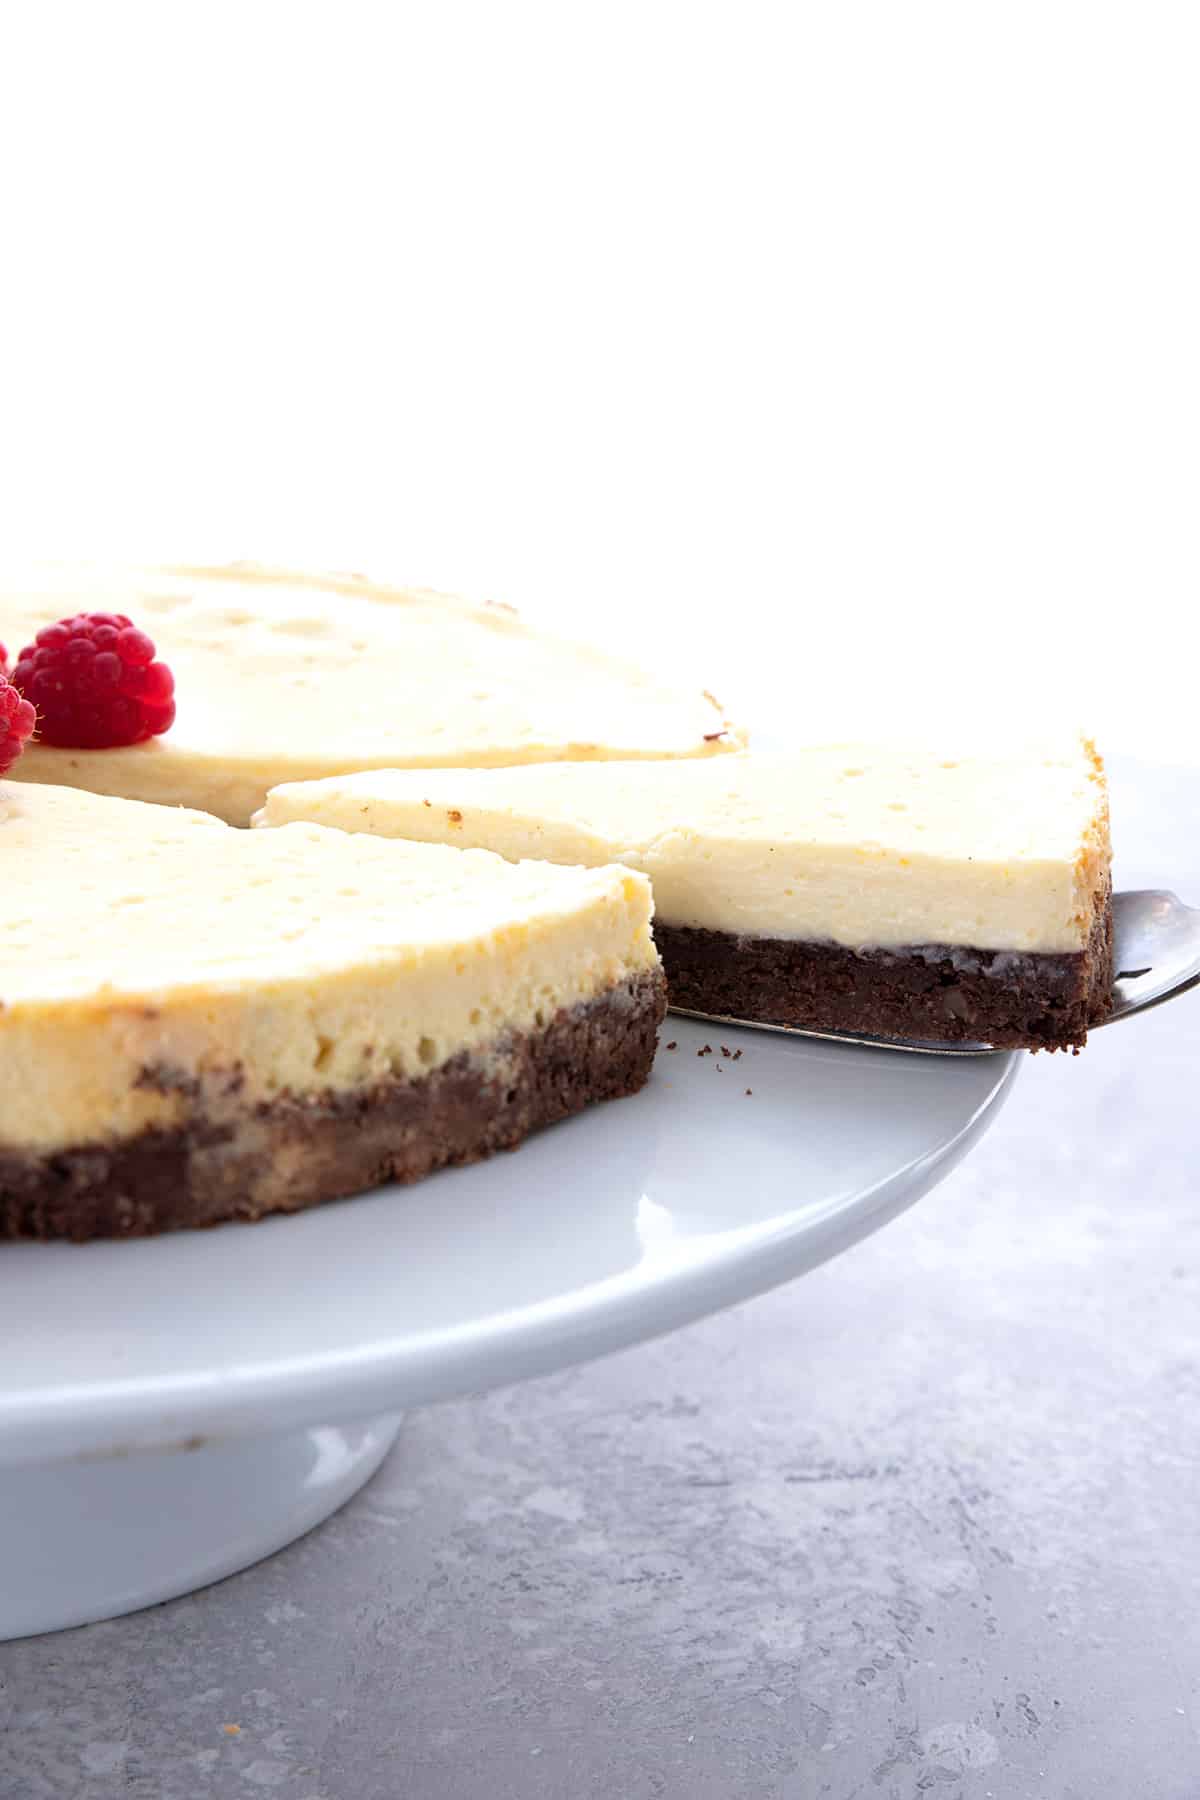 A slice of Keto Brownie Cheesecake being pulled away from the main cake.